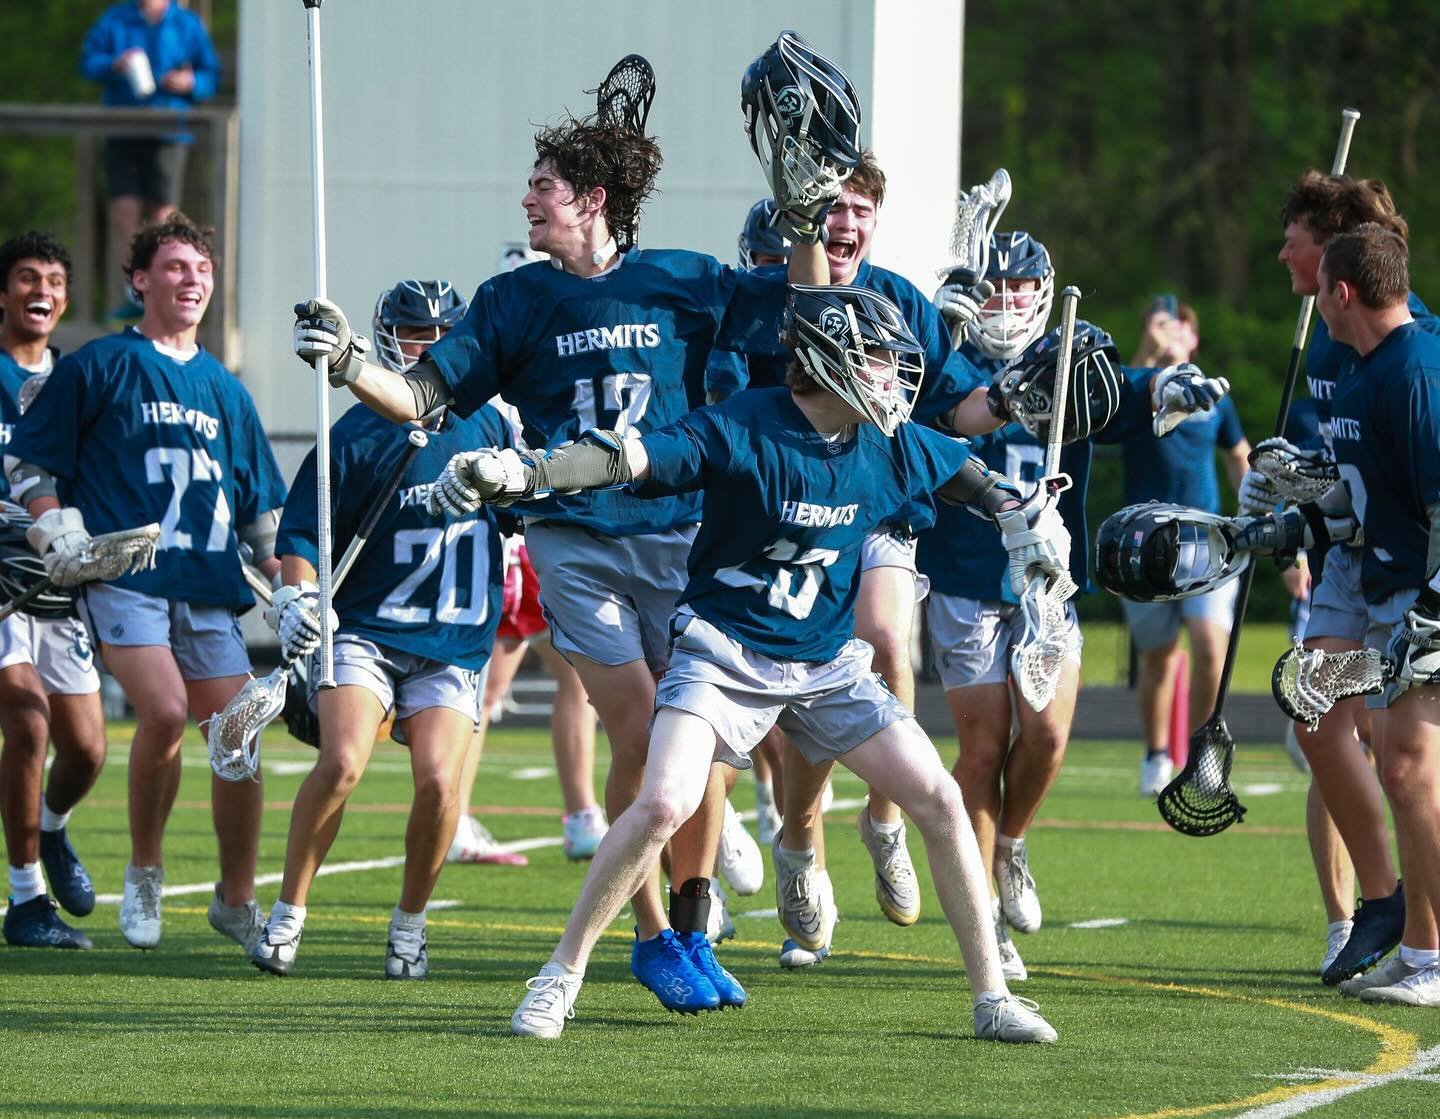 𝙎𝘾𝙀𝙉𝙀𝙎 𝙁𝙍𝙊𝙈 𝘼 𝙒𝙄𝙇𝘿 𝙊𝙉𝙀 𝙄𝙉 𝙋𝙍𝙄𝙉𝘾𝙀𝙏𝙊𝙉!

➡️ #HermitsLacrosse back in action this Saturday vs. Episcopal Academy, PA.